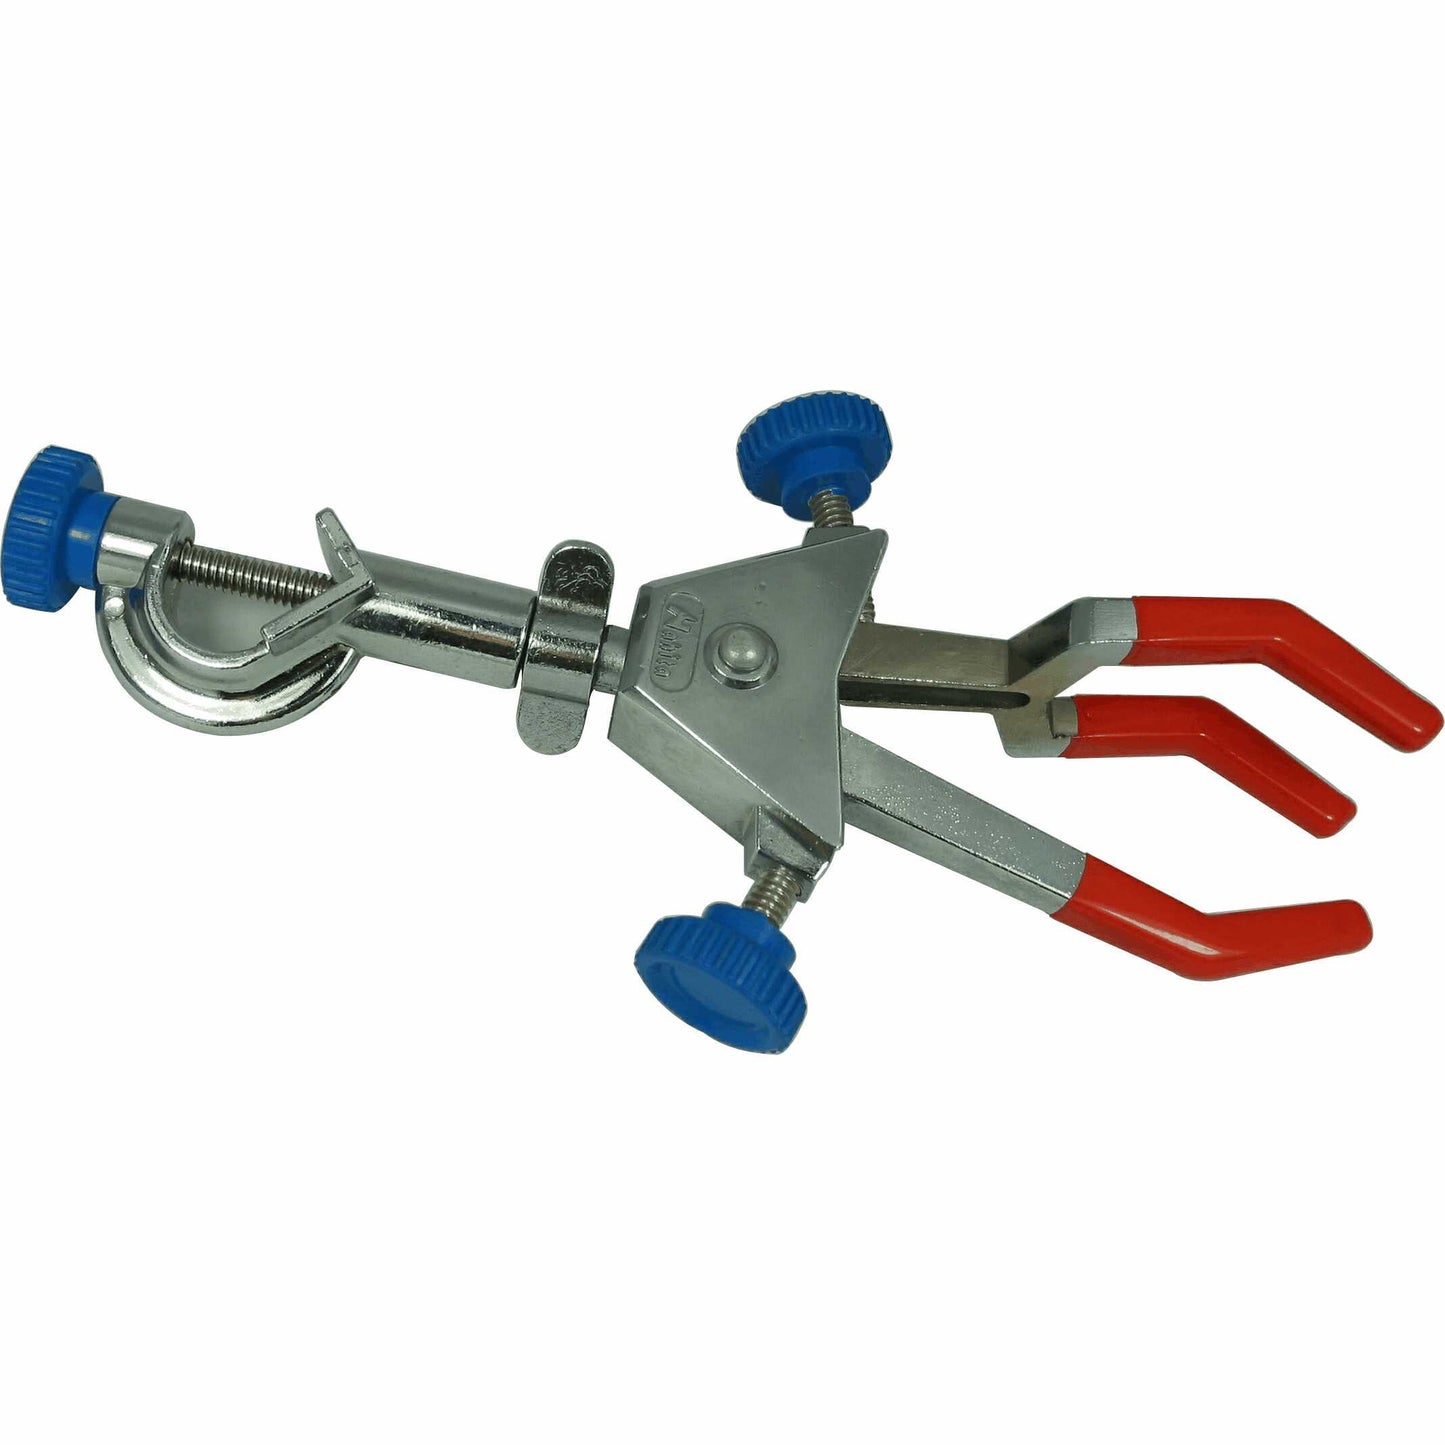 Three Finger Double Adjust Swivel Clamp Accept Objects From 0-70mm